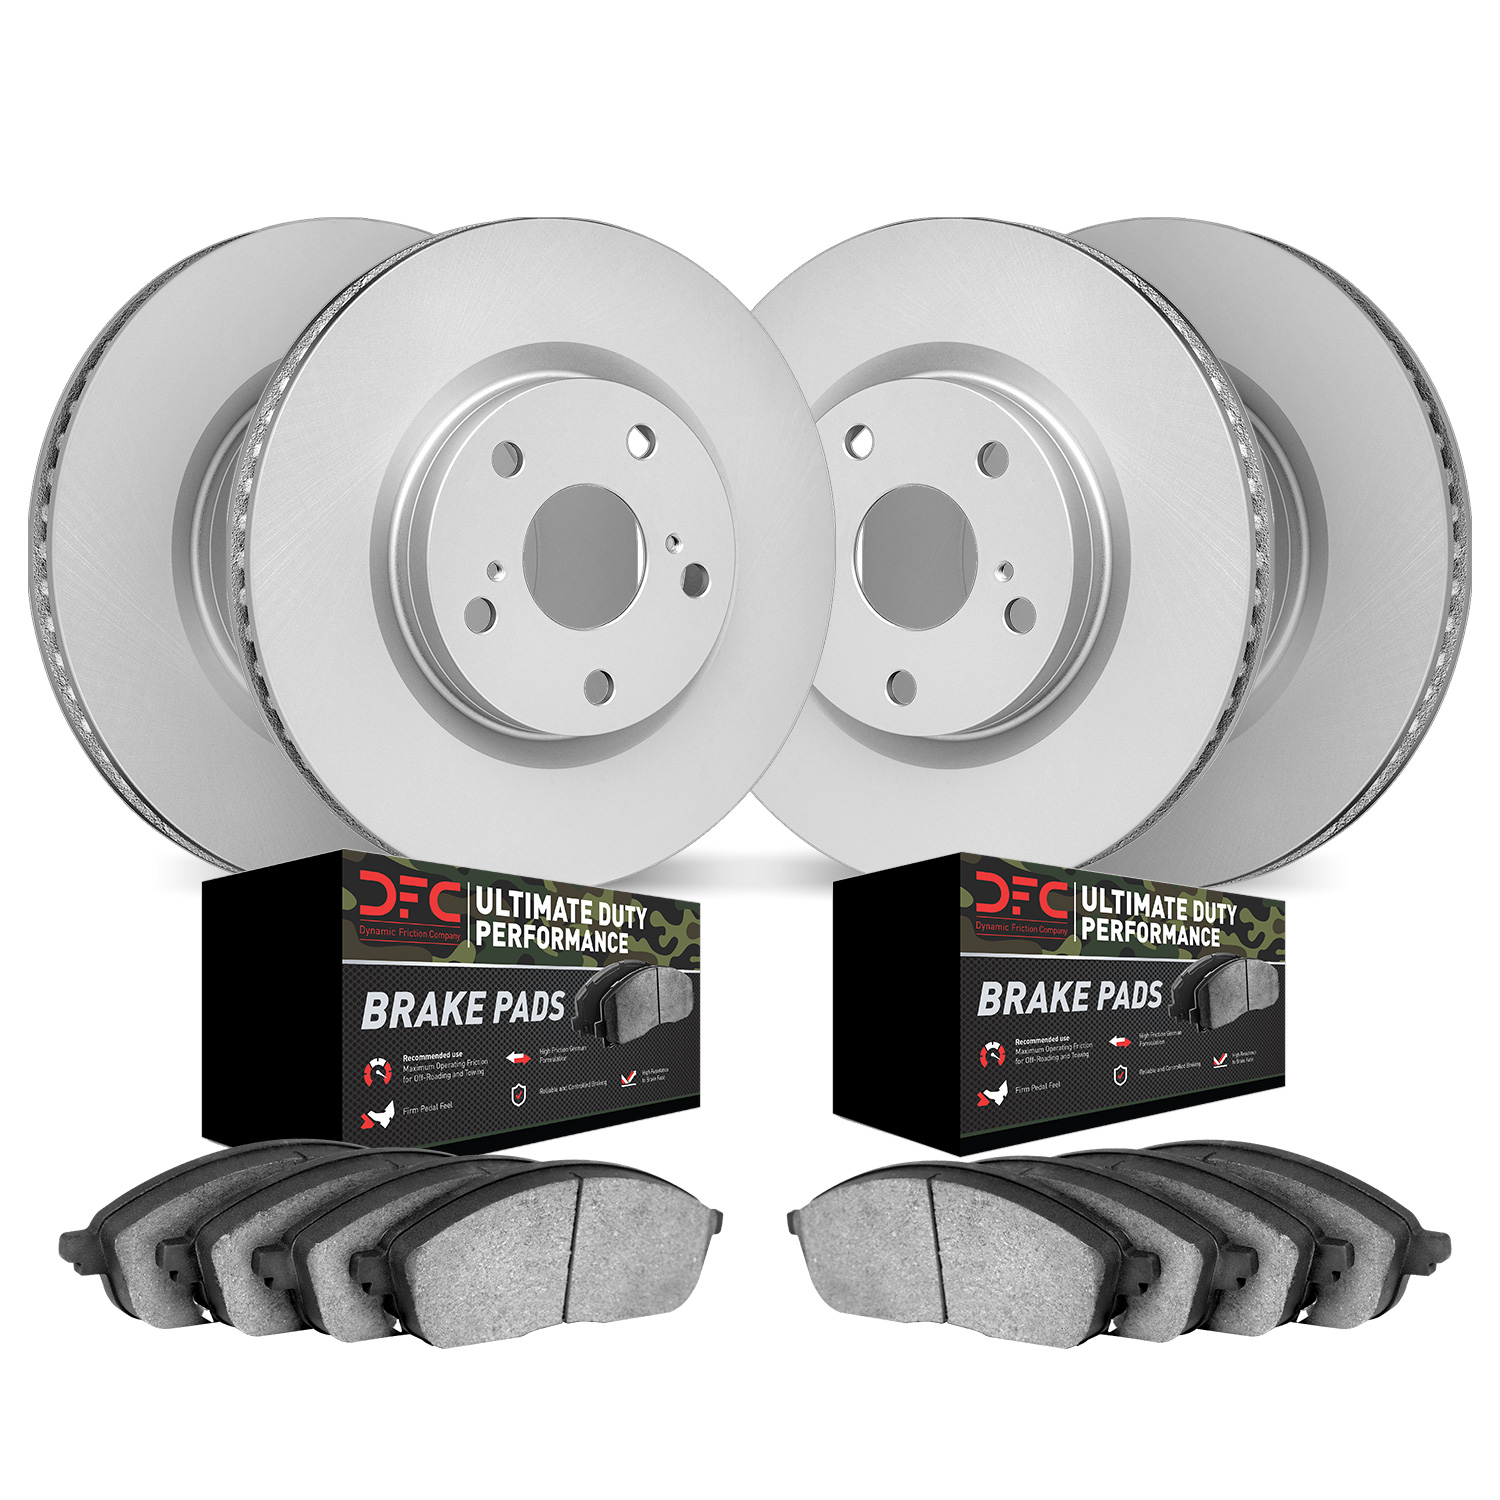 4404-42002 Geospec Brake Rotors with Ultimate-Duty Brake Pads Kit, 2006-2010 Mopar, Position: Front and Rear